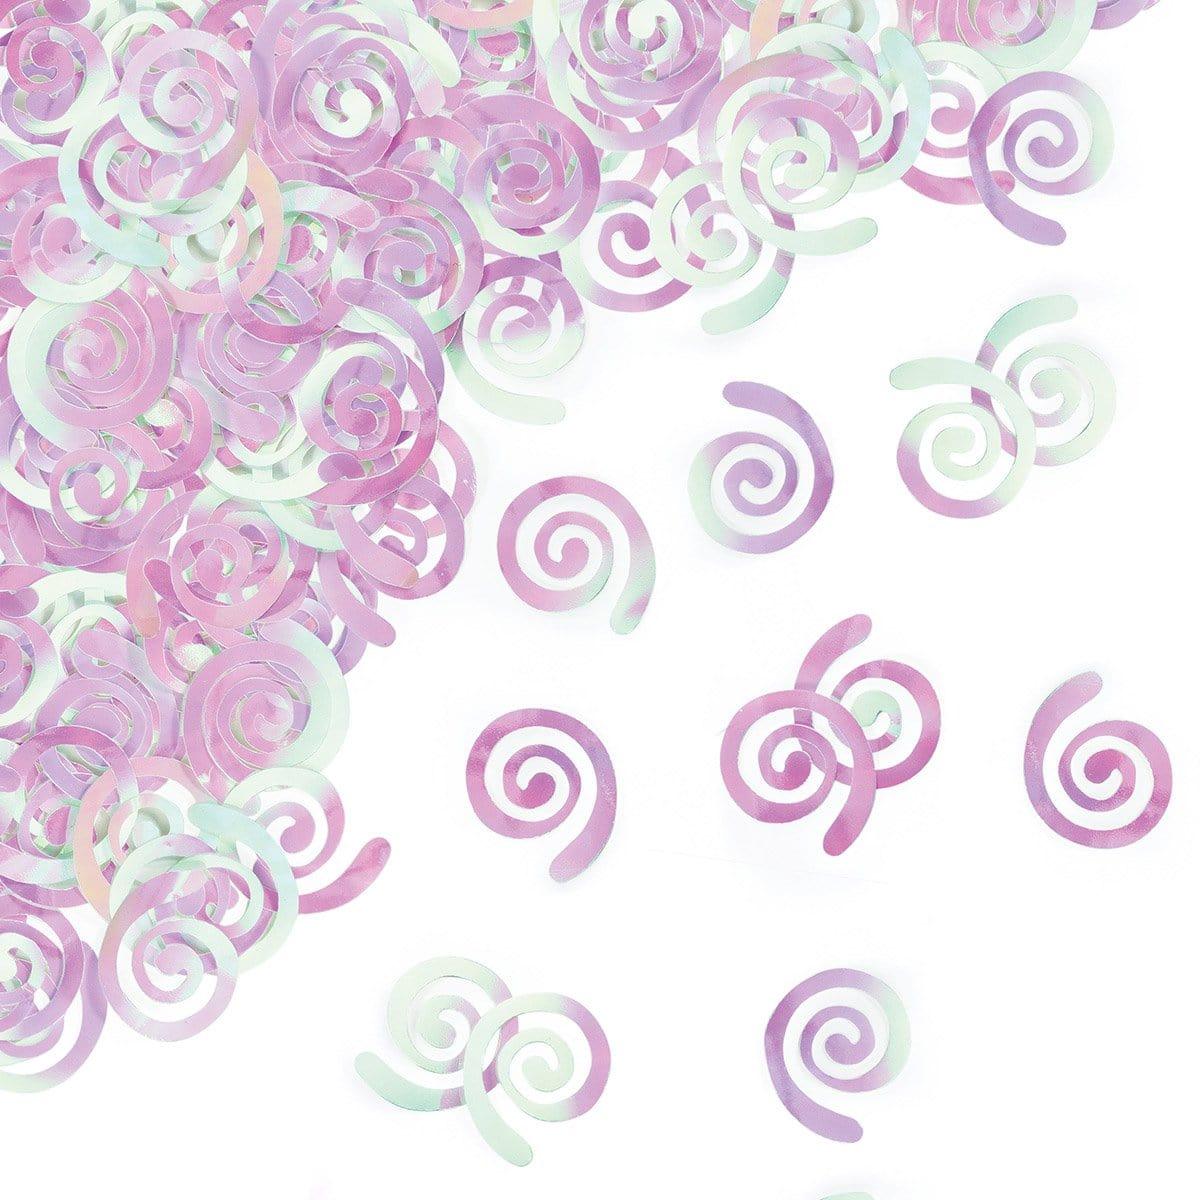 Buy Everyday Entertaining Iridescent Swirl Confetti sold at Party Expert